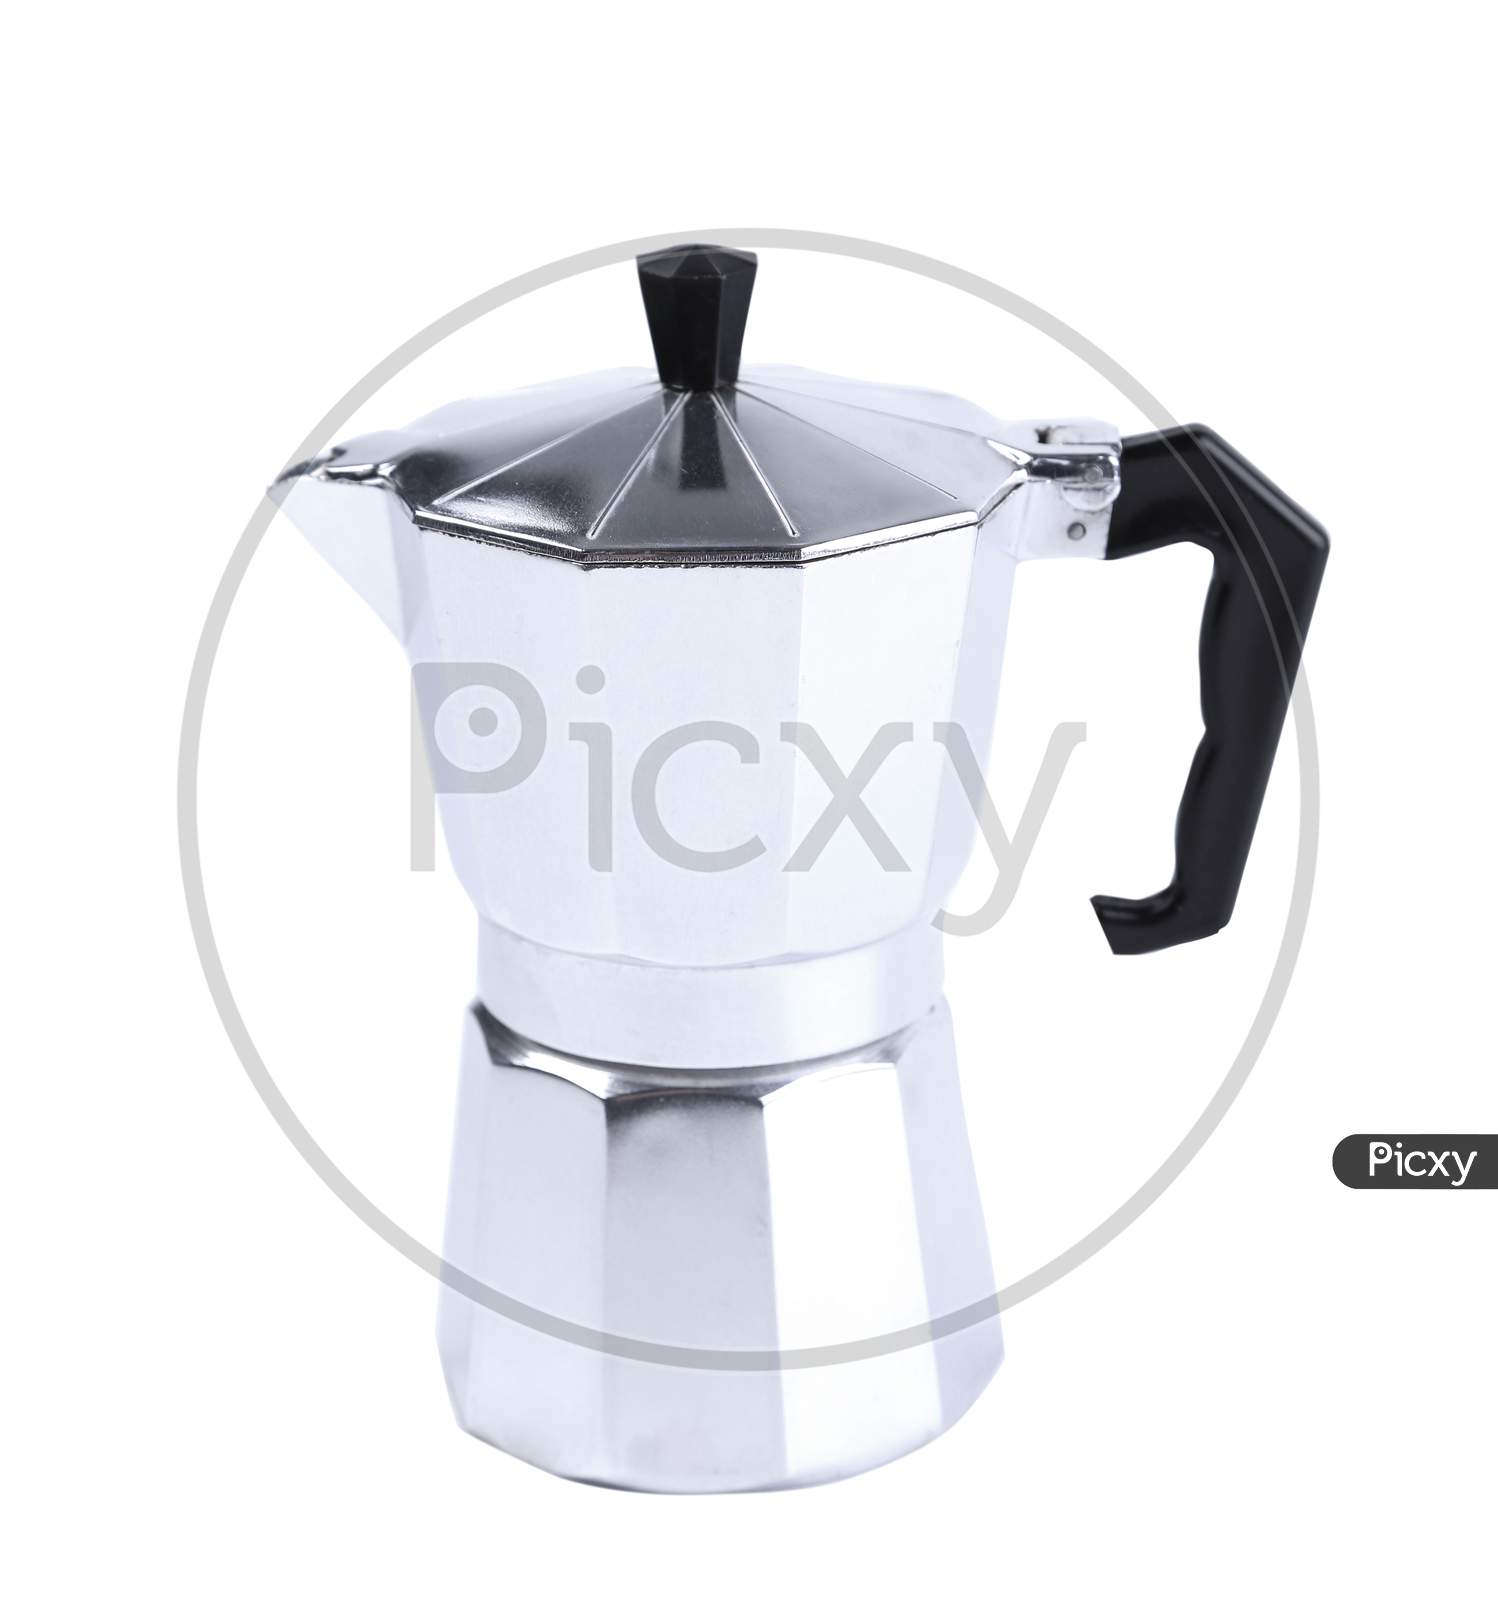 Percolator Coffee With The Lid Closed. Isolated On A White Background.